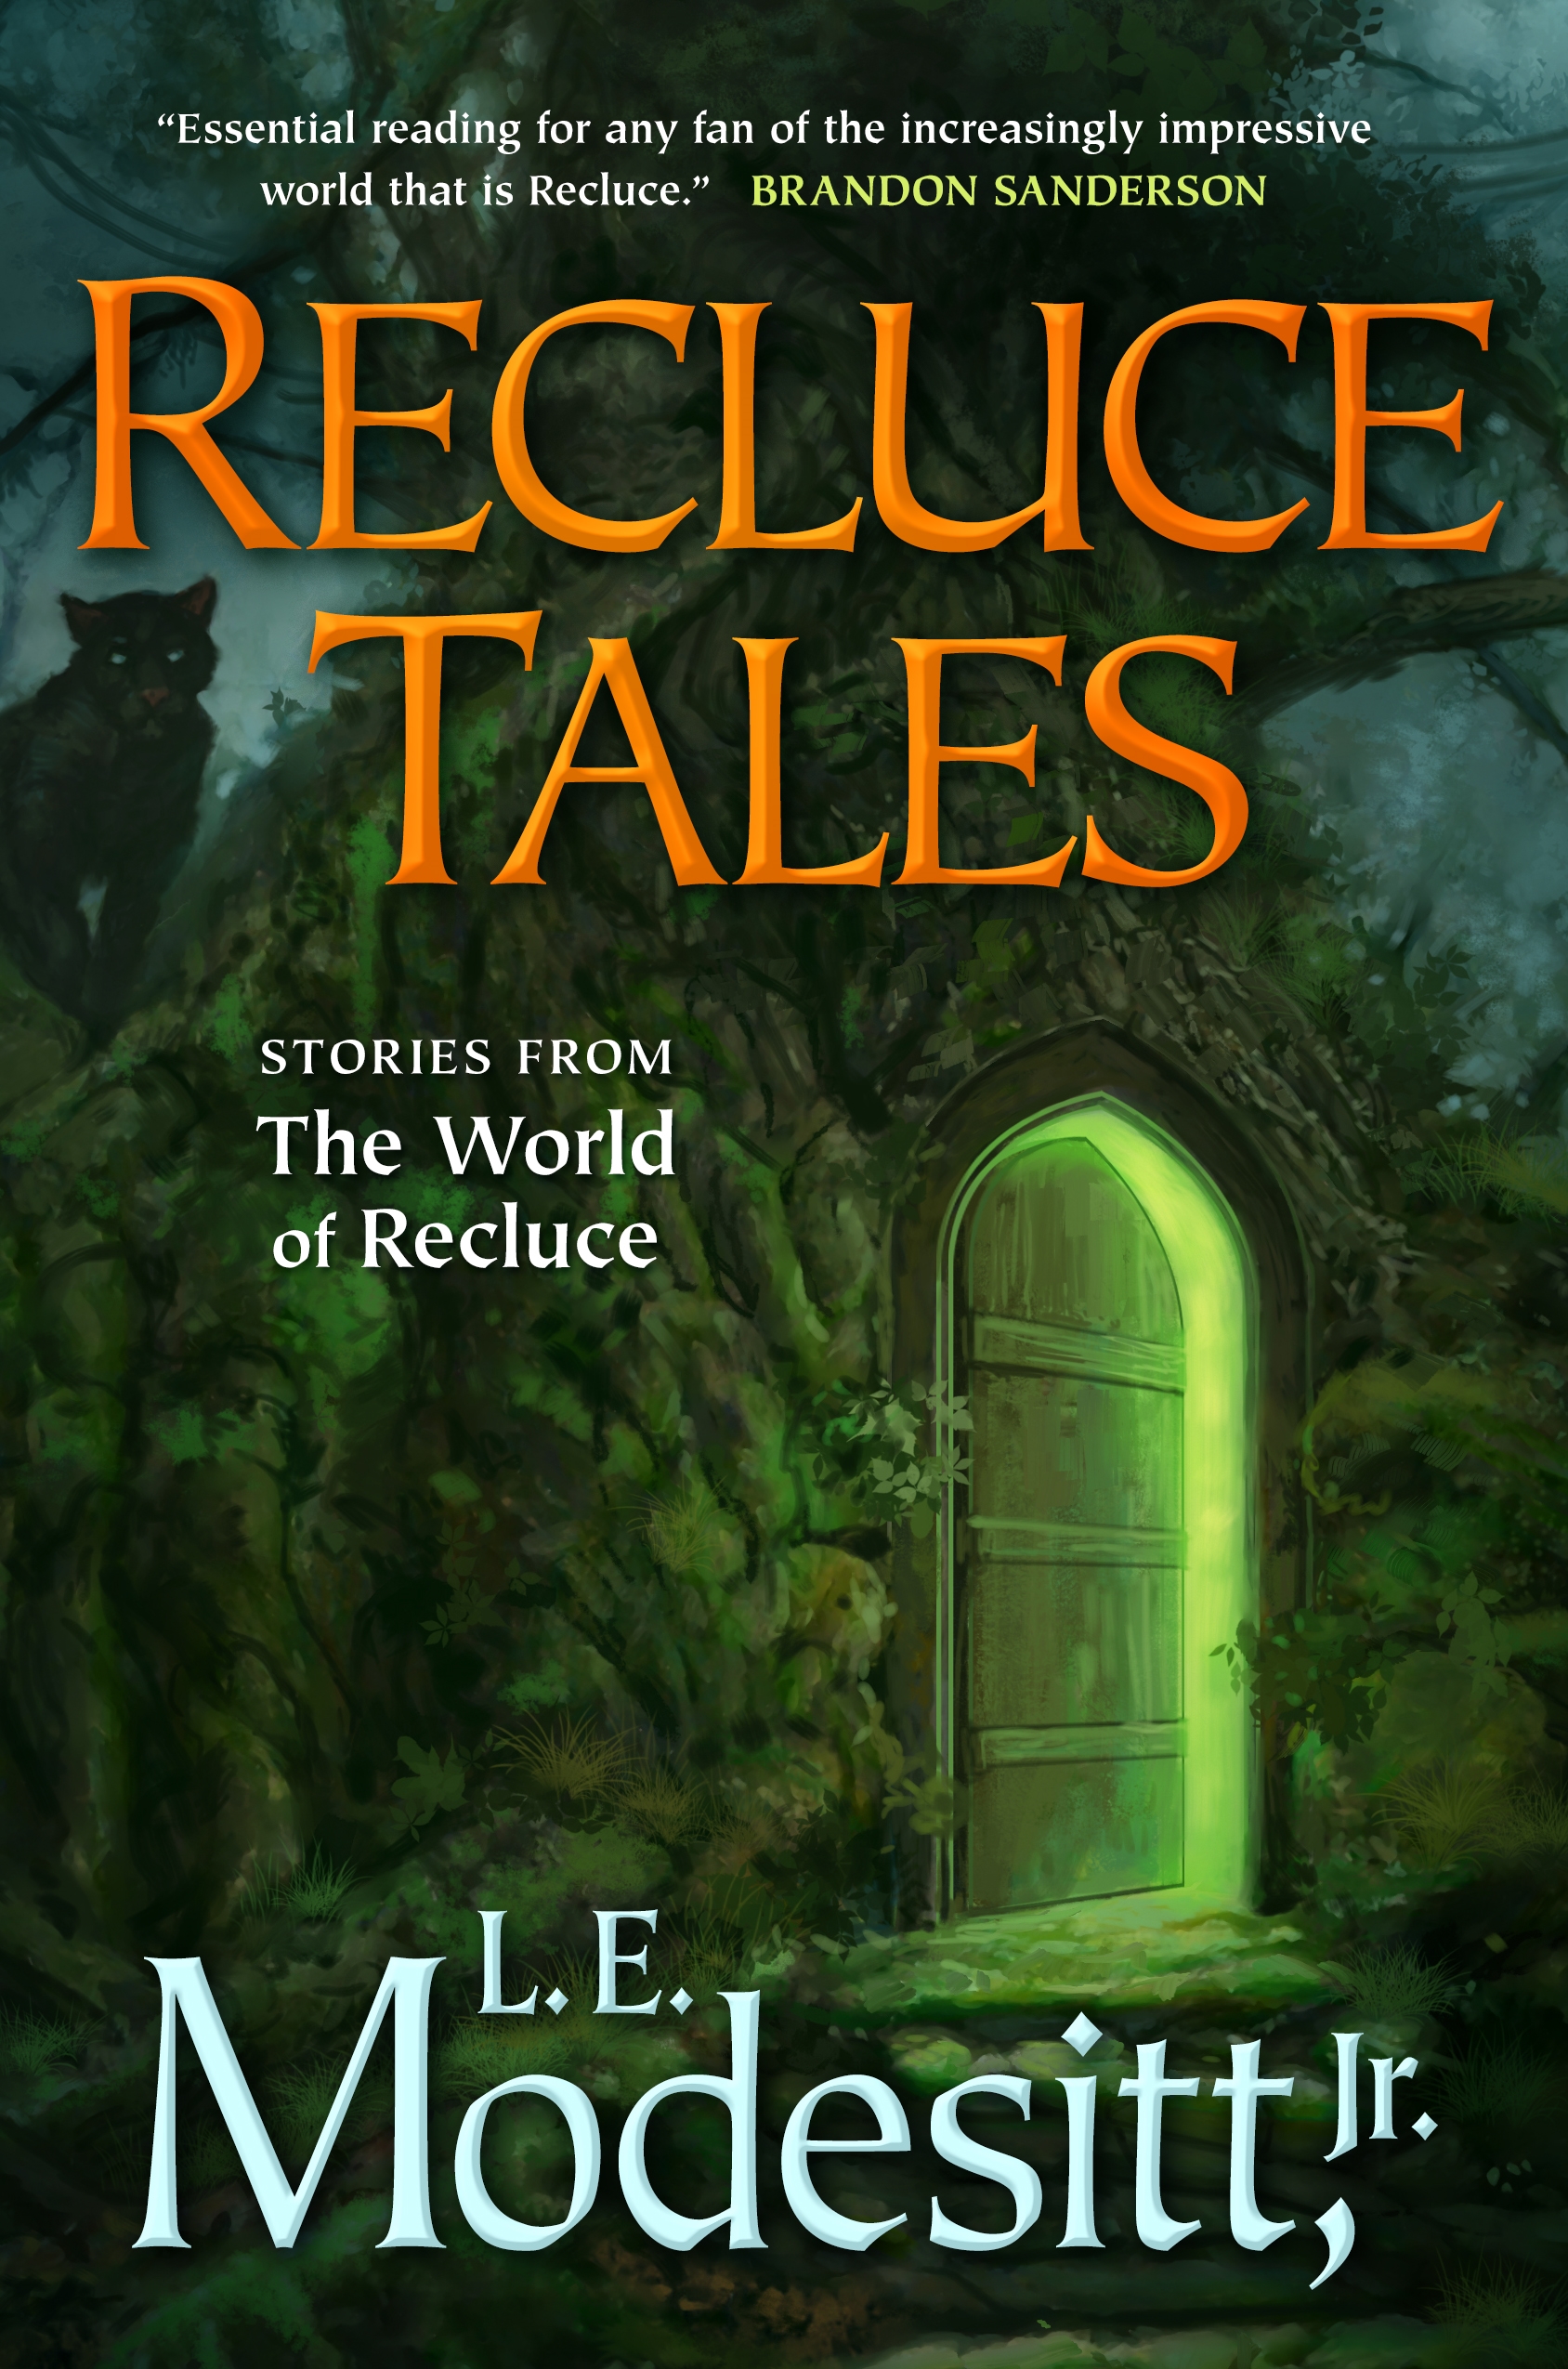 Recluce Tales : Stories from the World of Recluce by L. E. Modesitt, Jr.